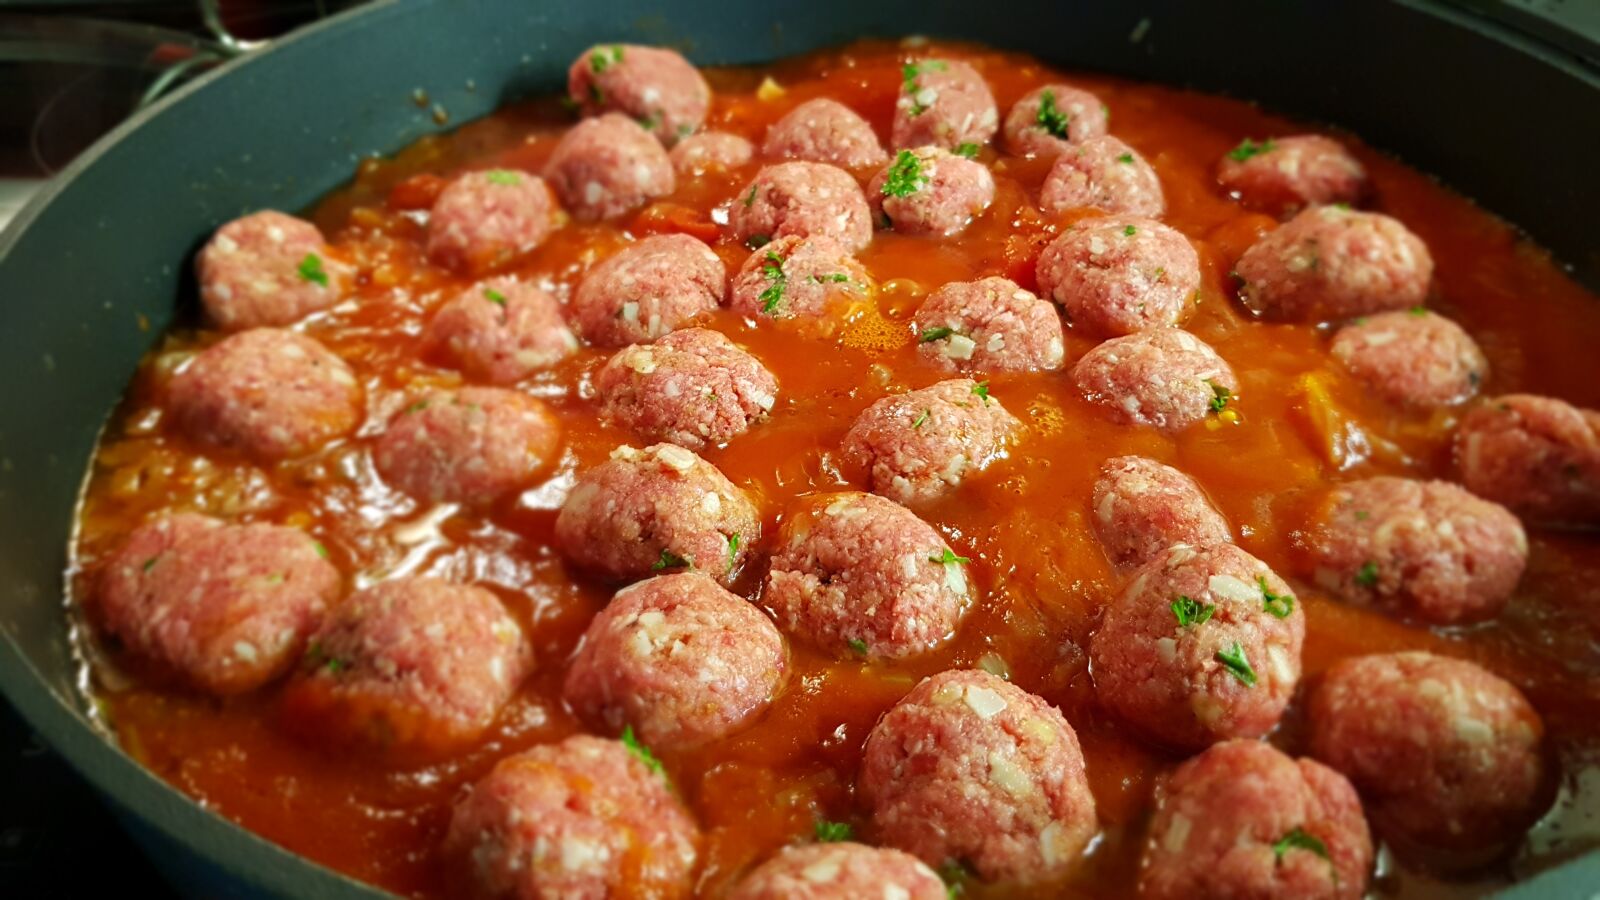 Samsung Galaxy S7 sample photo. Minced meat, cook, eat photography